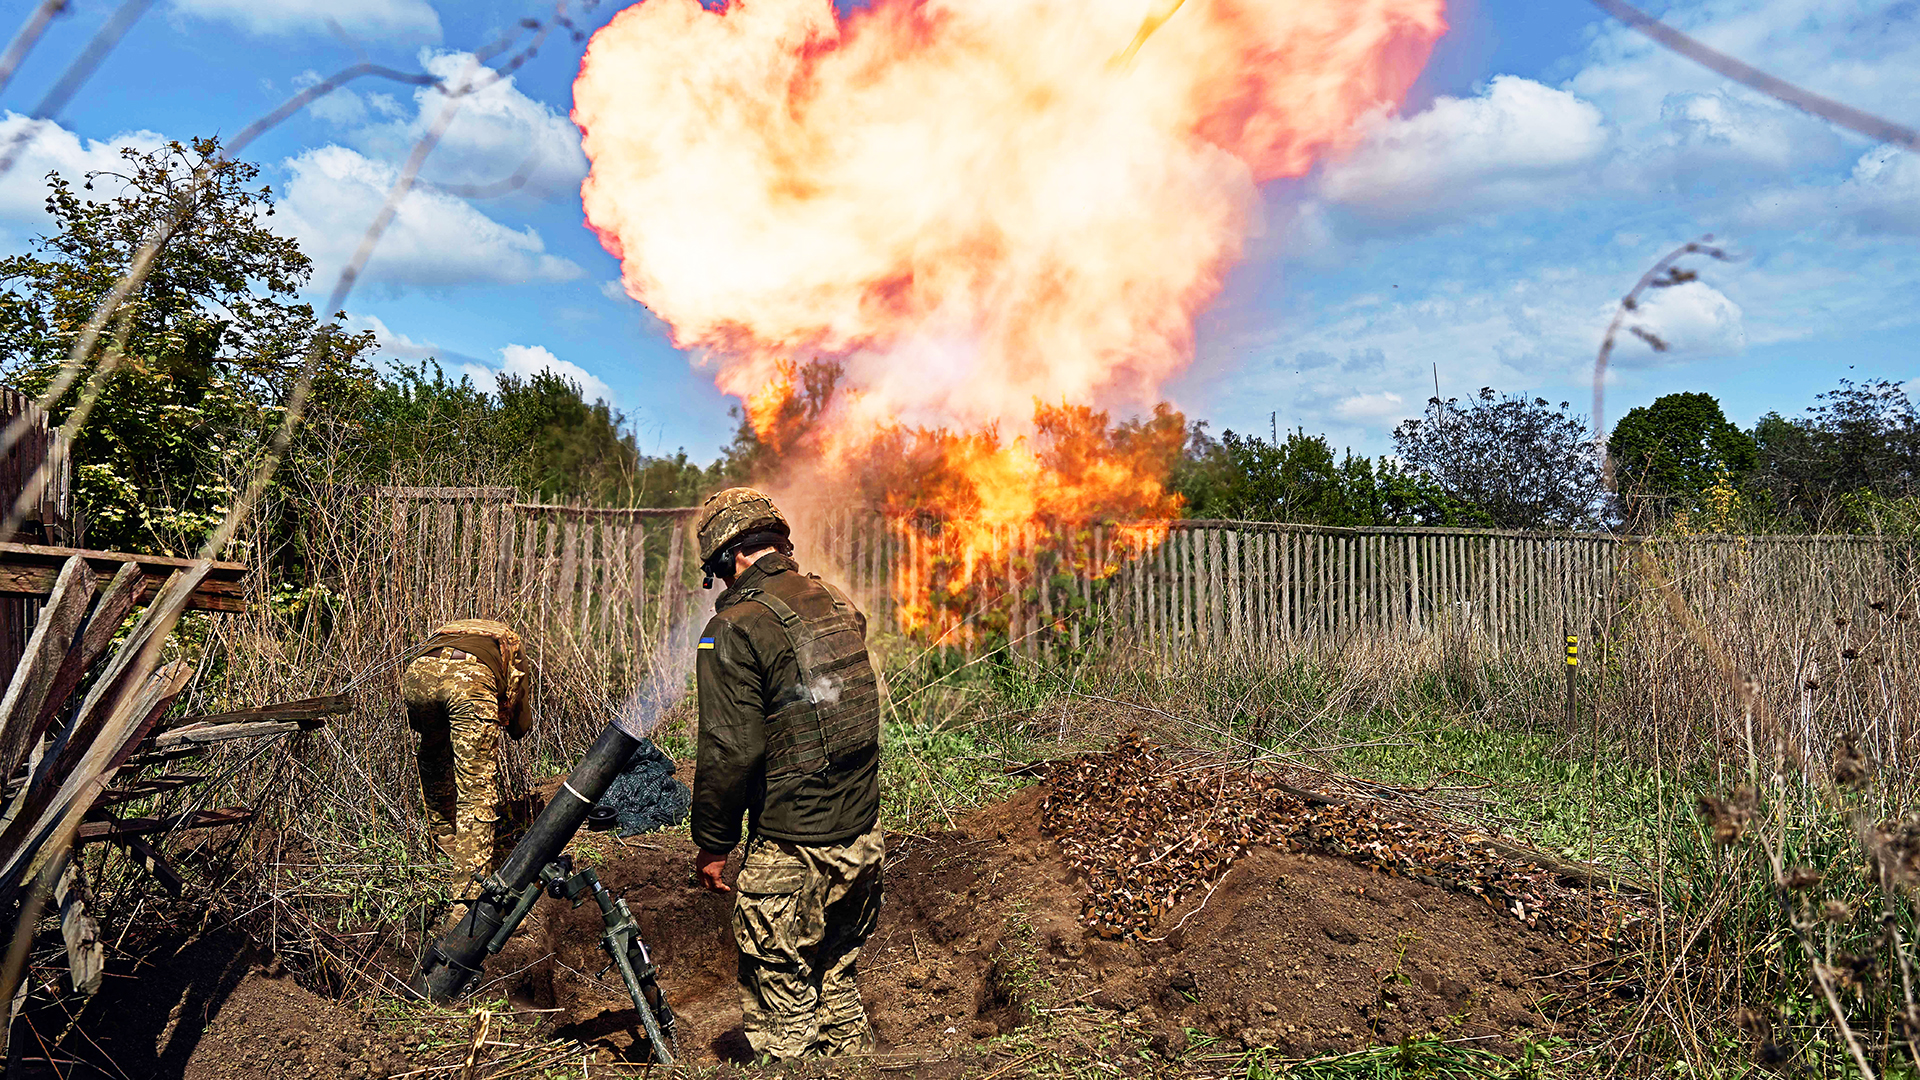 KHARKIV REGION, UKRAINE - MAY 18:  A mortar unit with a 120 mm mortar prepares to perform a combat mission on May 18, 2024 in the Kharkiv region, near the border with Russia. Ukrainian soldiers from the 92nd assault brigade were involved in holding back the Russians on the border with Russia. In recent days Russian forces have gained ground around the Kharkiv region, which Ukraine had largely reclaimed in the months following Russia's initial large-scale invasion in February 2022.